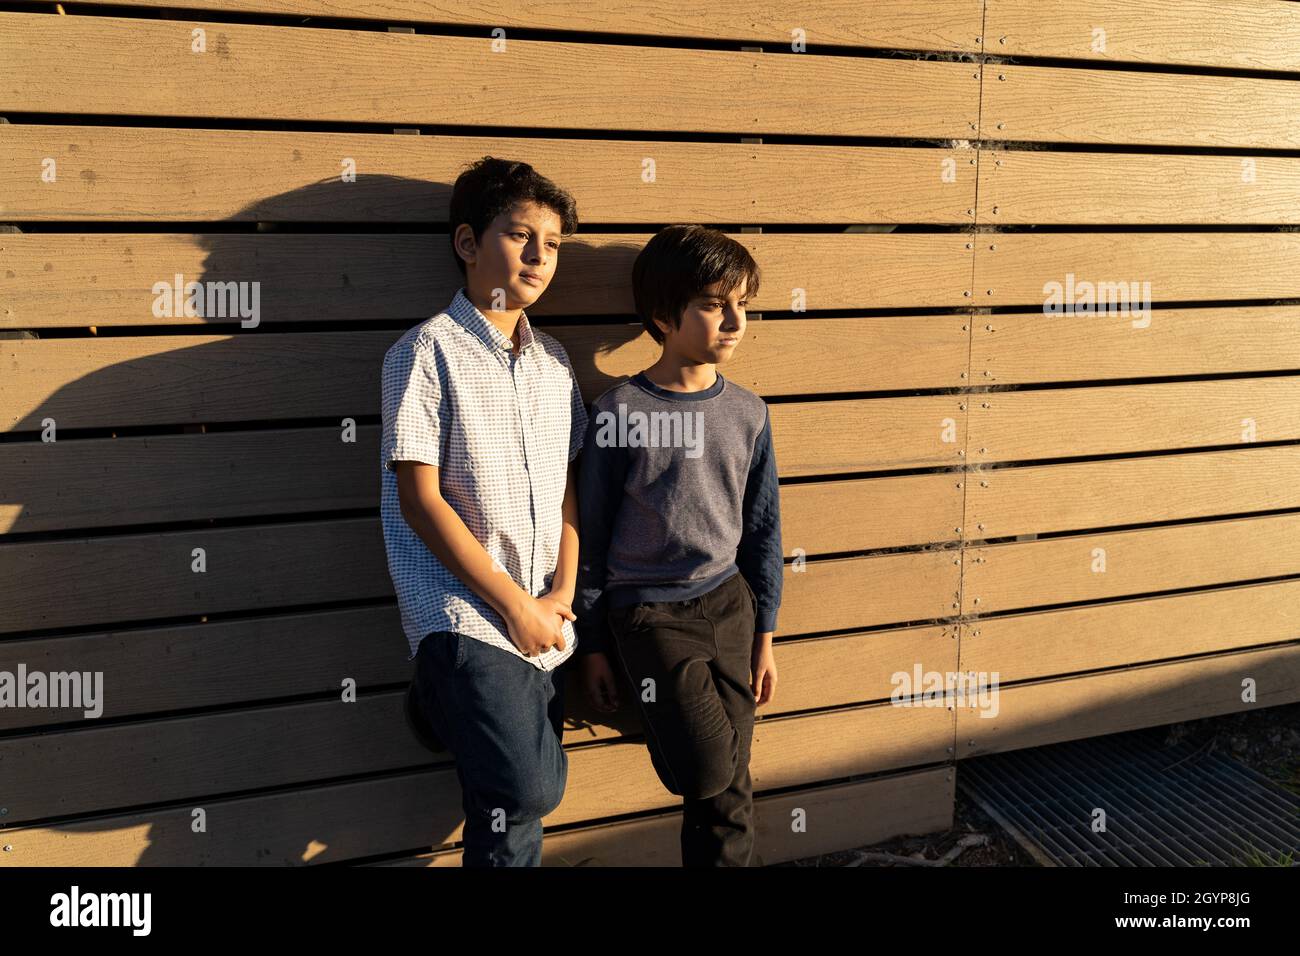 Two South Asian kids standing against wooden wall. Concept of children thinking about future. Friendship concept. Stock Photo